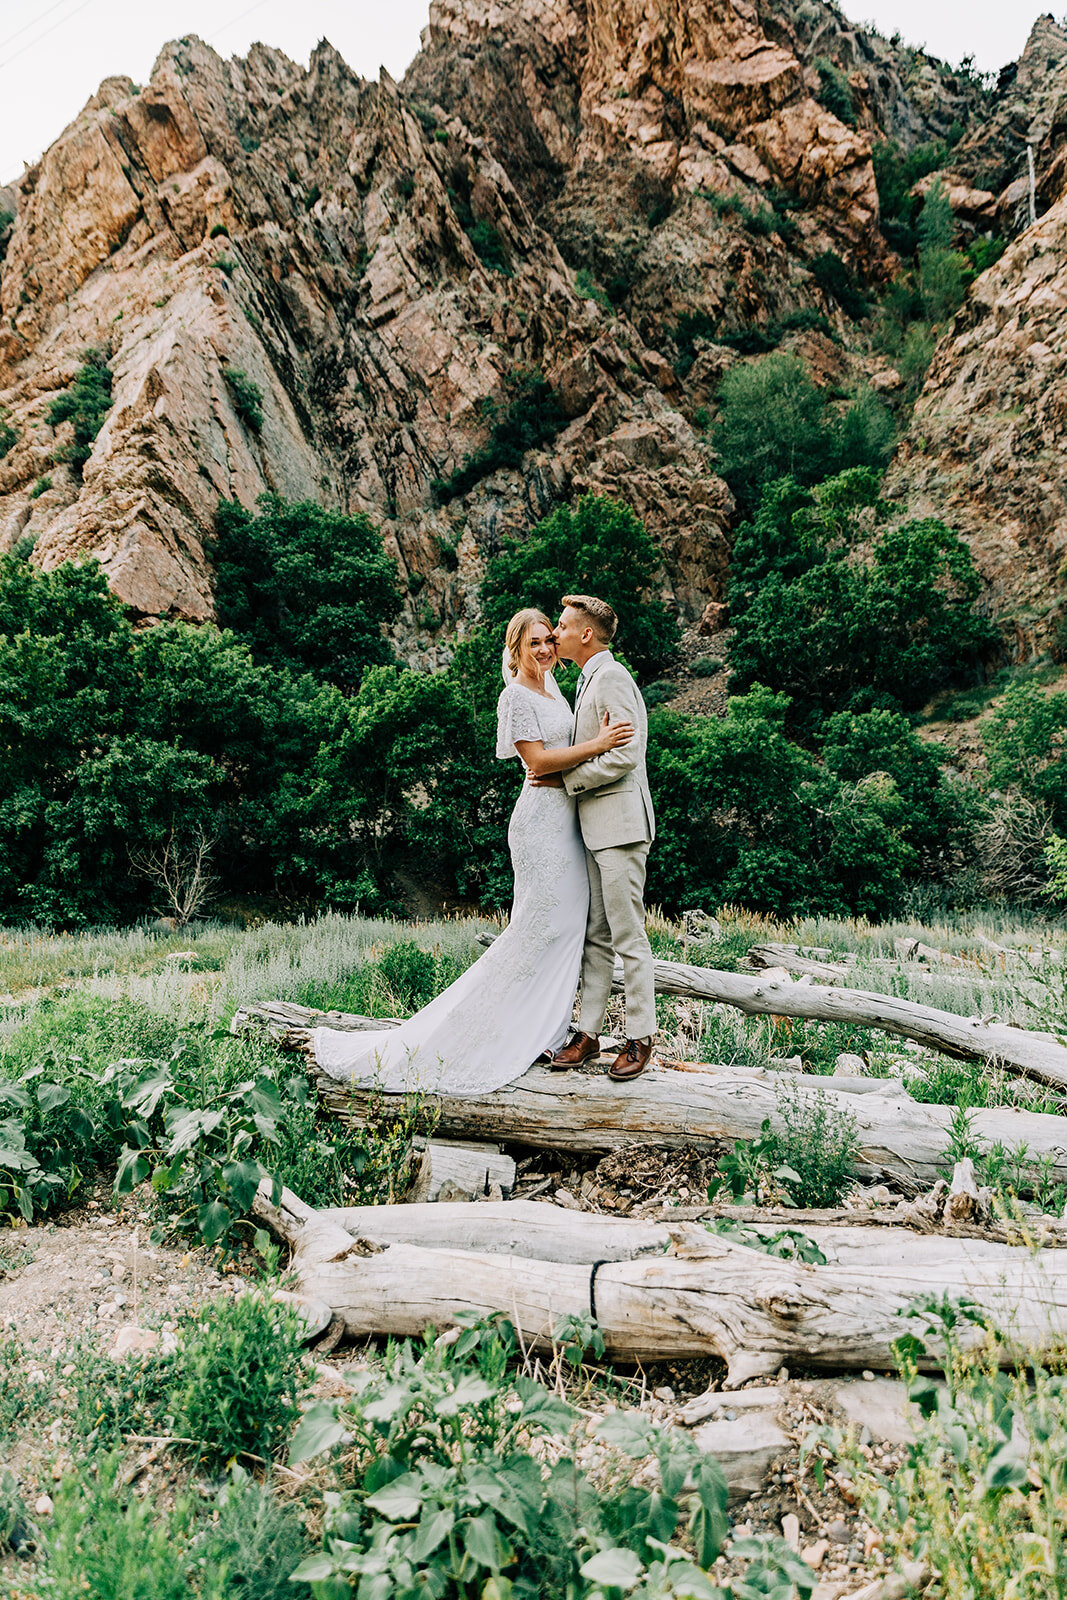  A handsome groom kissing his bride in a romantic outdoor formal wedding photo shoot by Bella Alder Photography. Cottonwood Canyon Salt Lake City, Utah formals professional Utah photographer wedding photography hugging couple pose inspiration ideas a